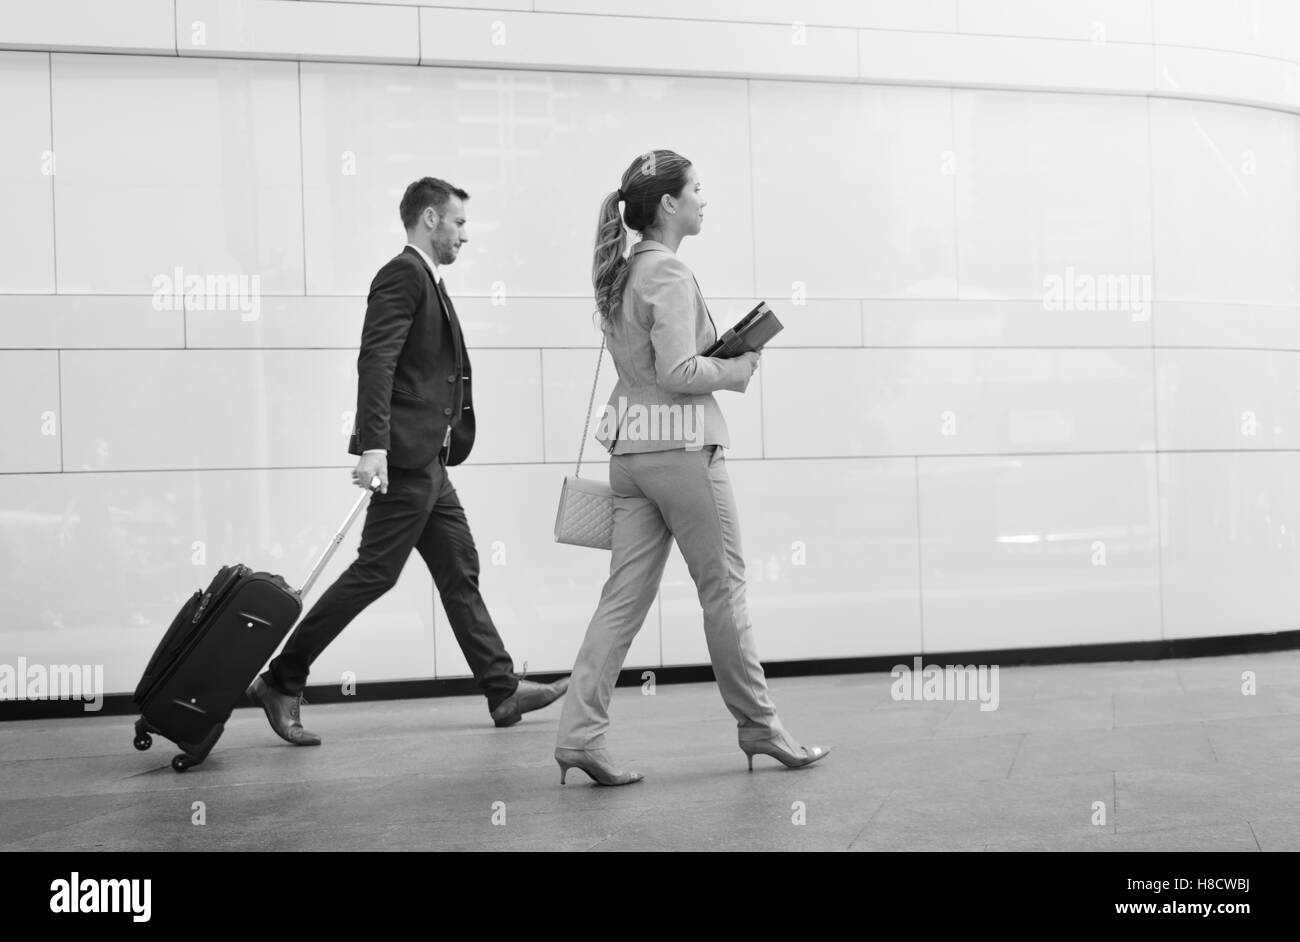 Business People Commuter Walking City Life Concept Stock Photo